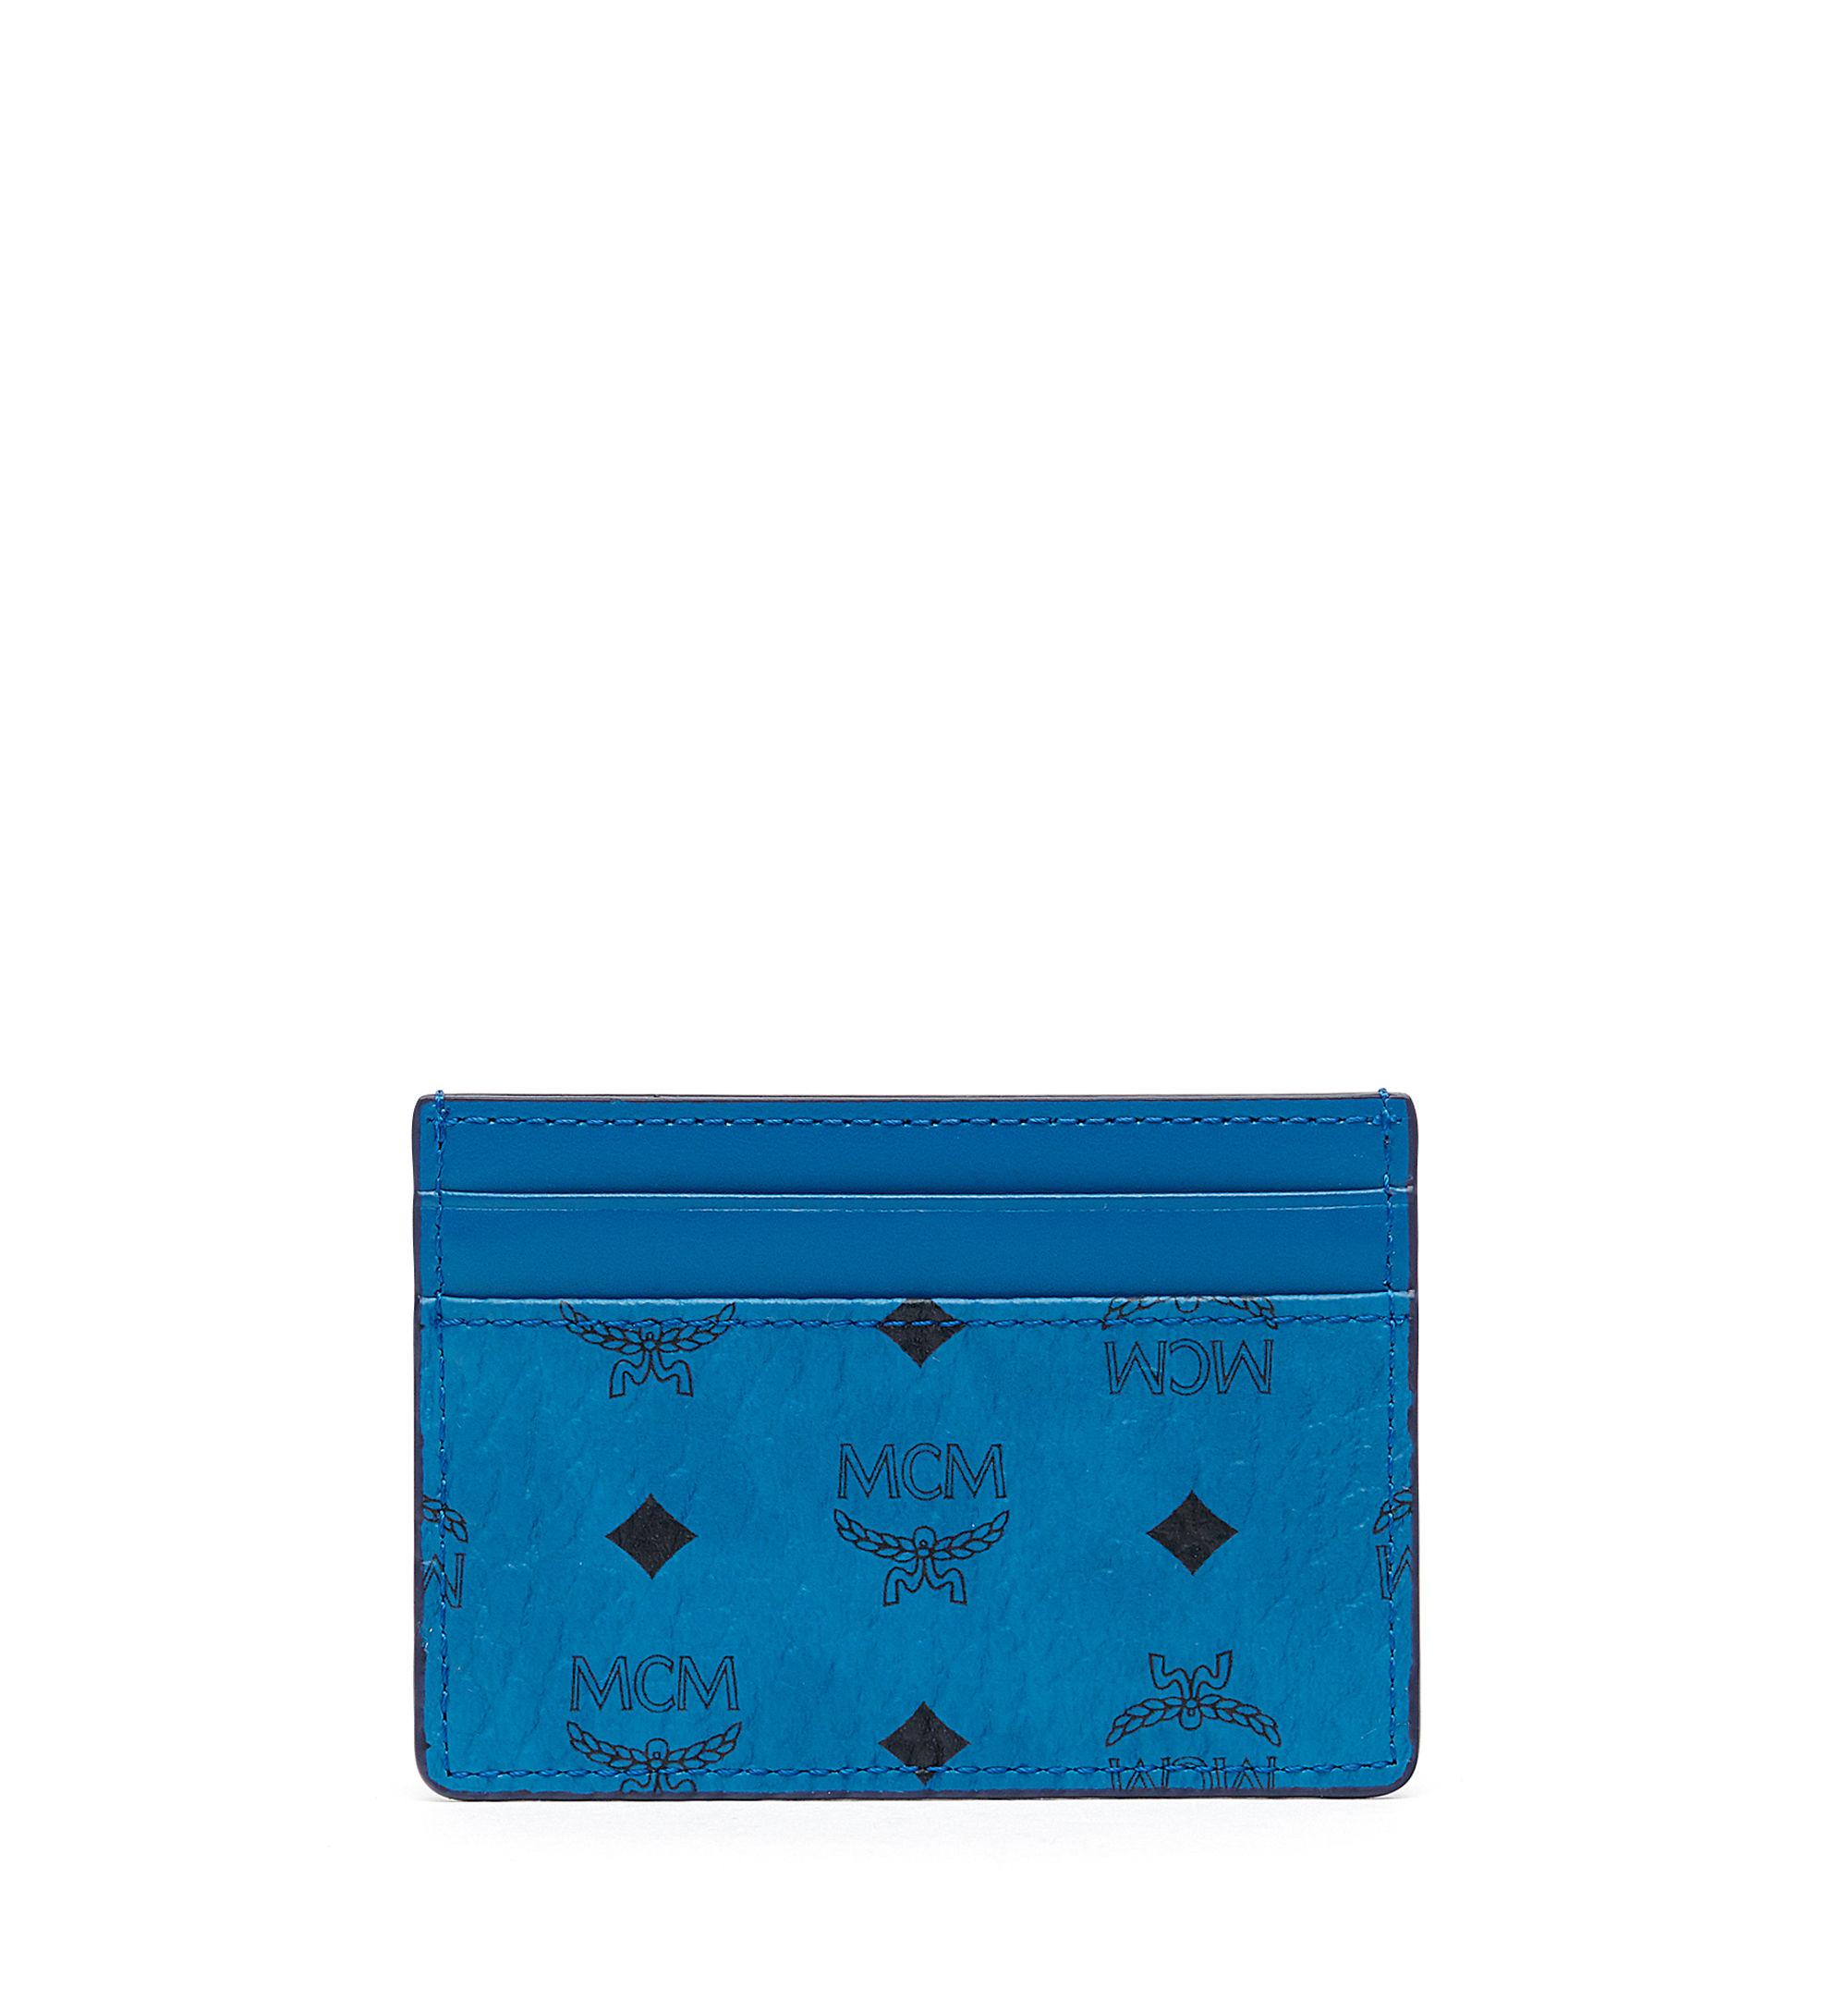 Mcm Claus Card Wallet in Blue | Lyst